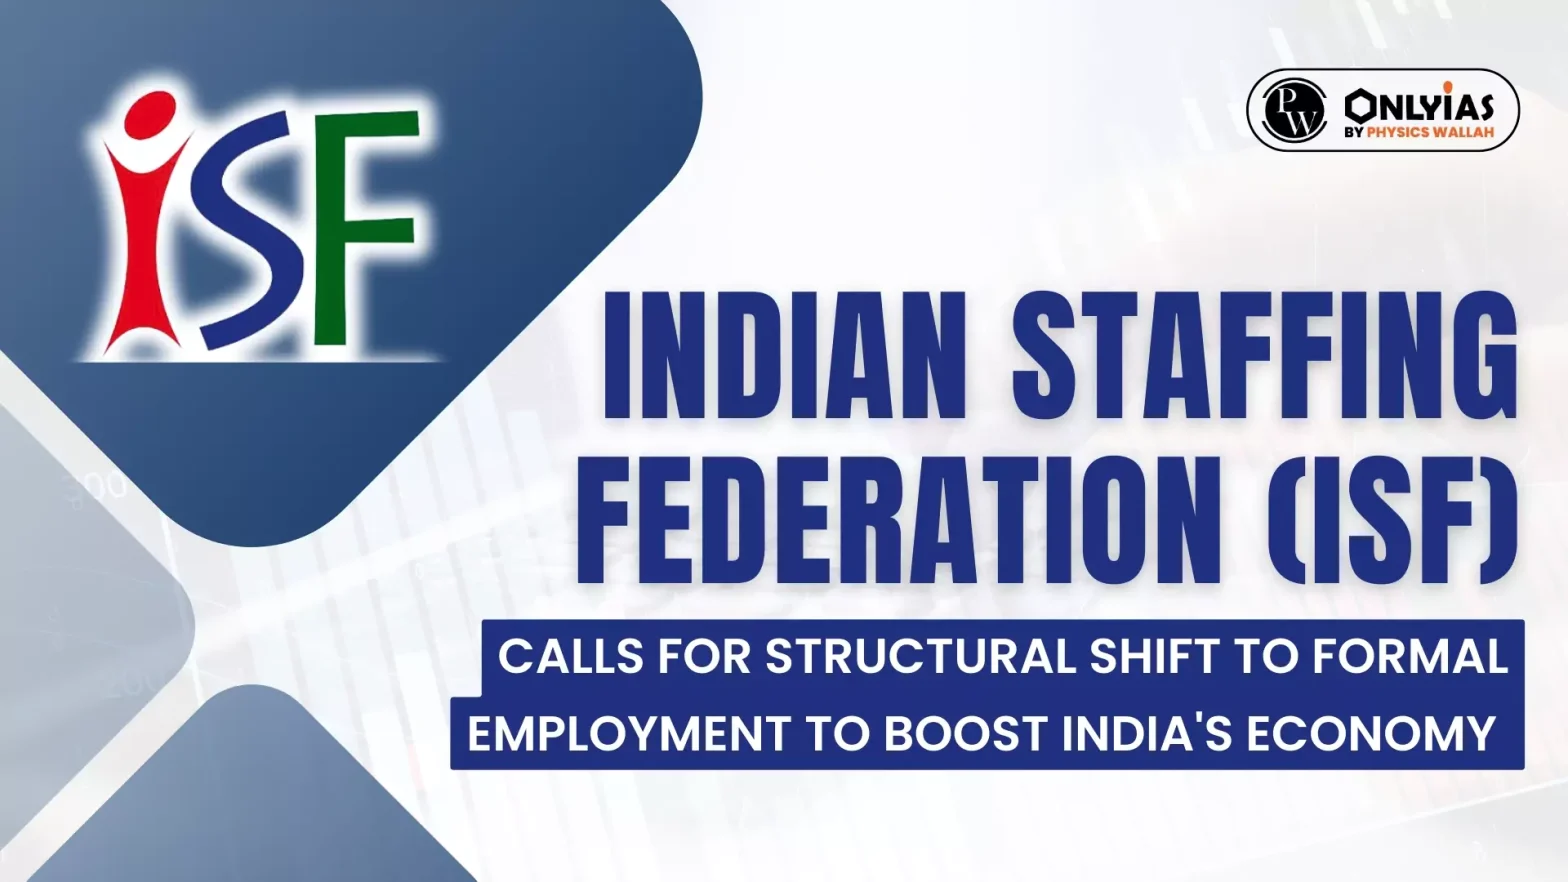 Indian Staffing Federation (ISF) Calls for Structural Shift to Formal Employment to Boost India’s Economy